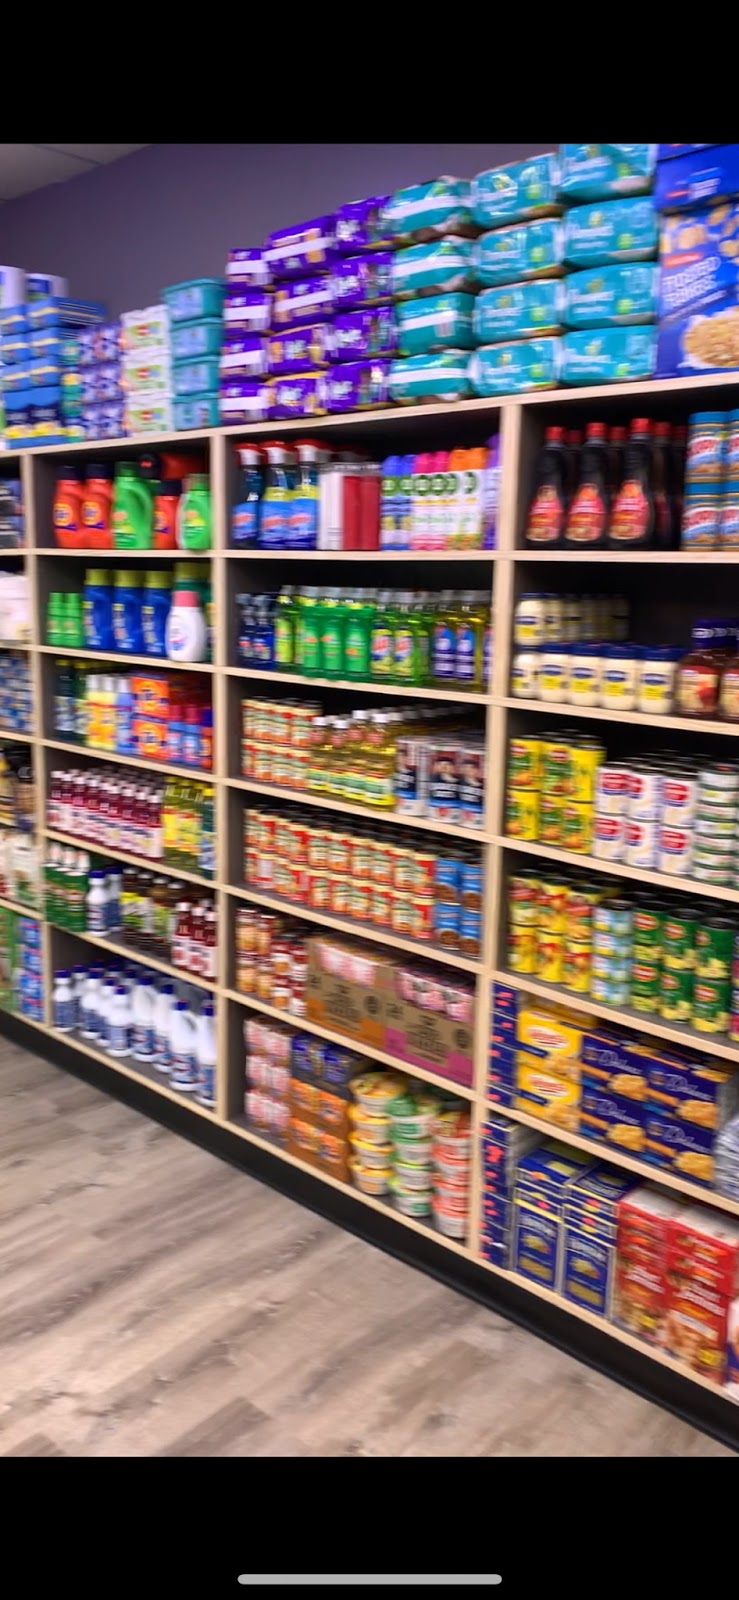 Westshore convenience | 585 Veterans Rd W, Staten Island, NY 10309 | Phone: (347) 838-6663